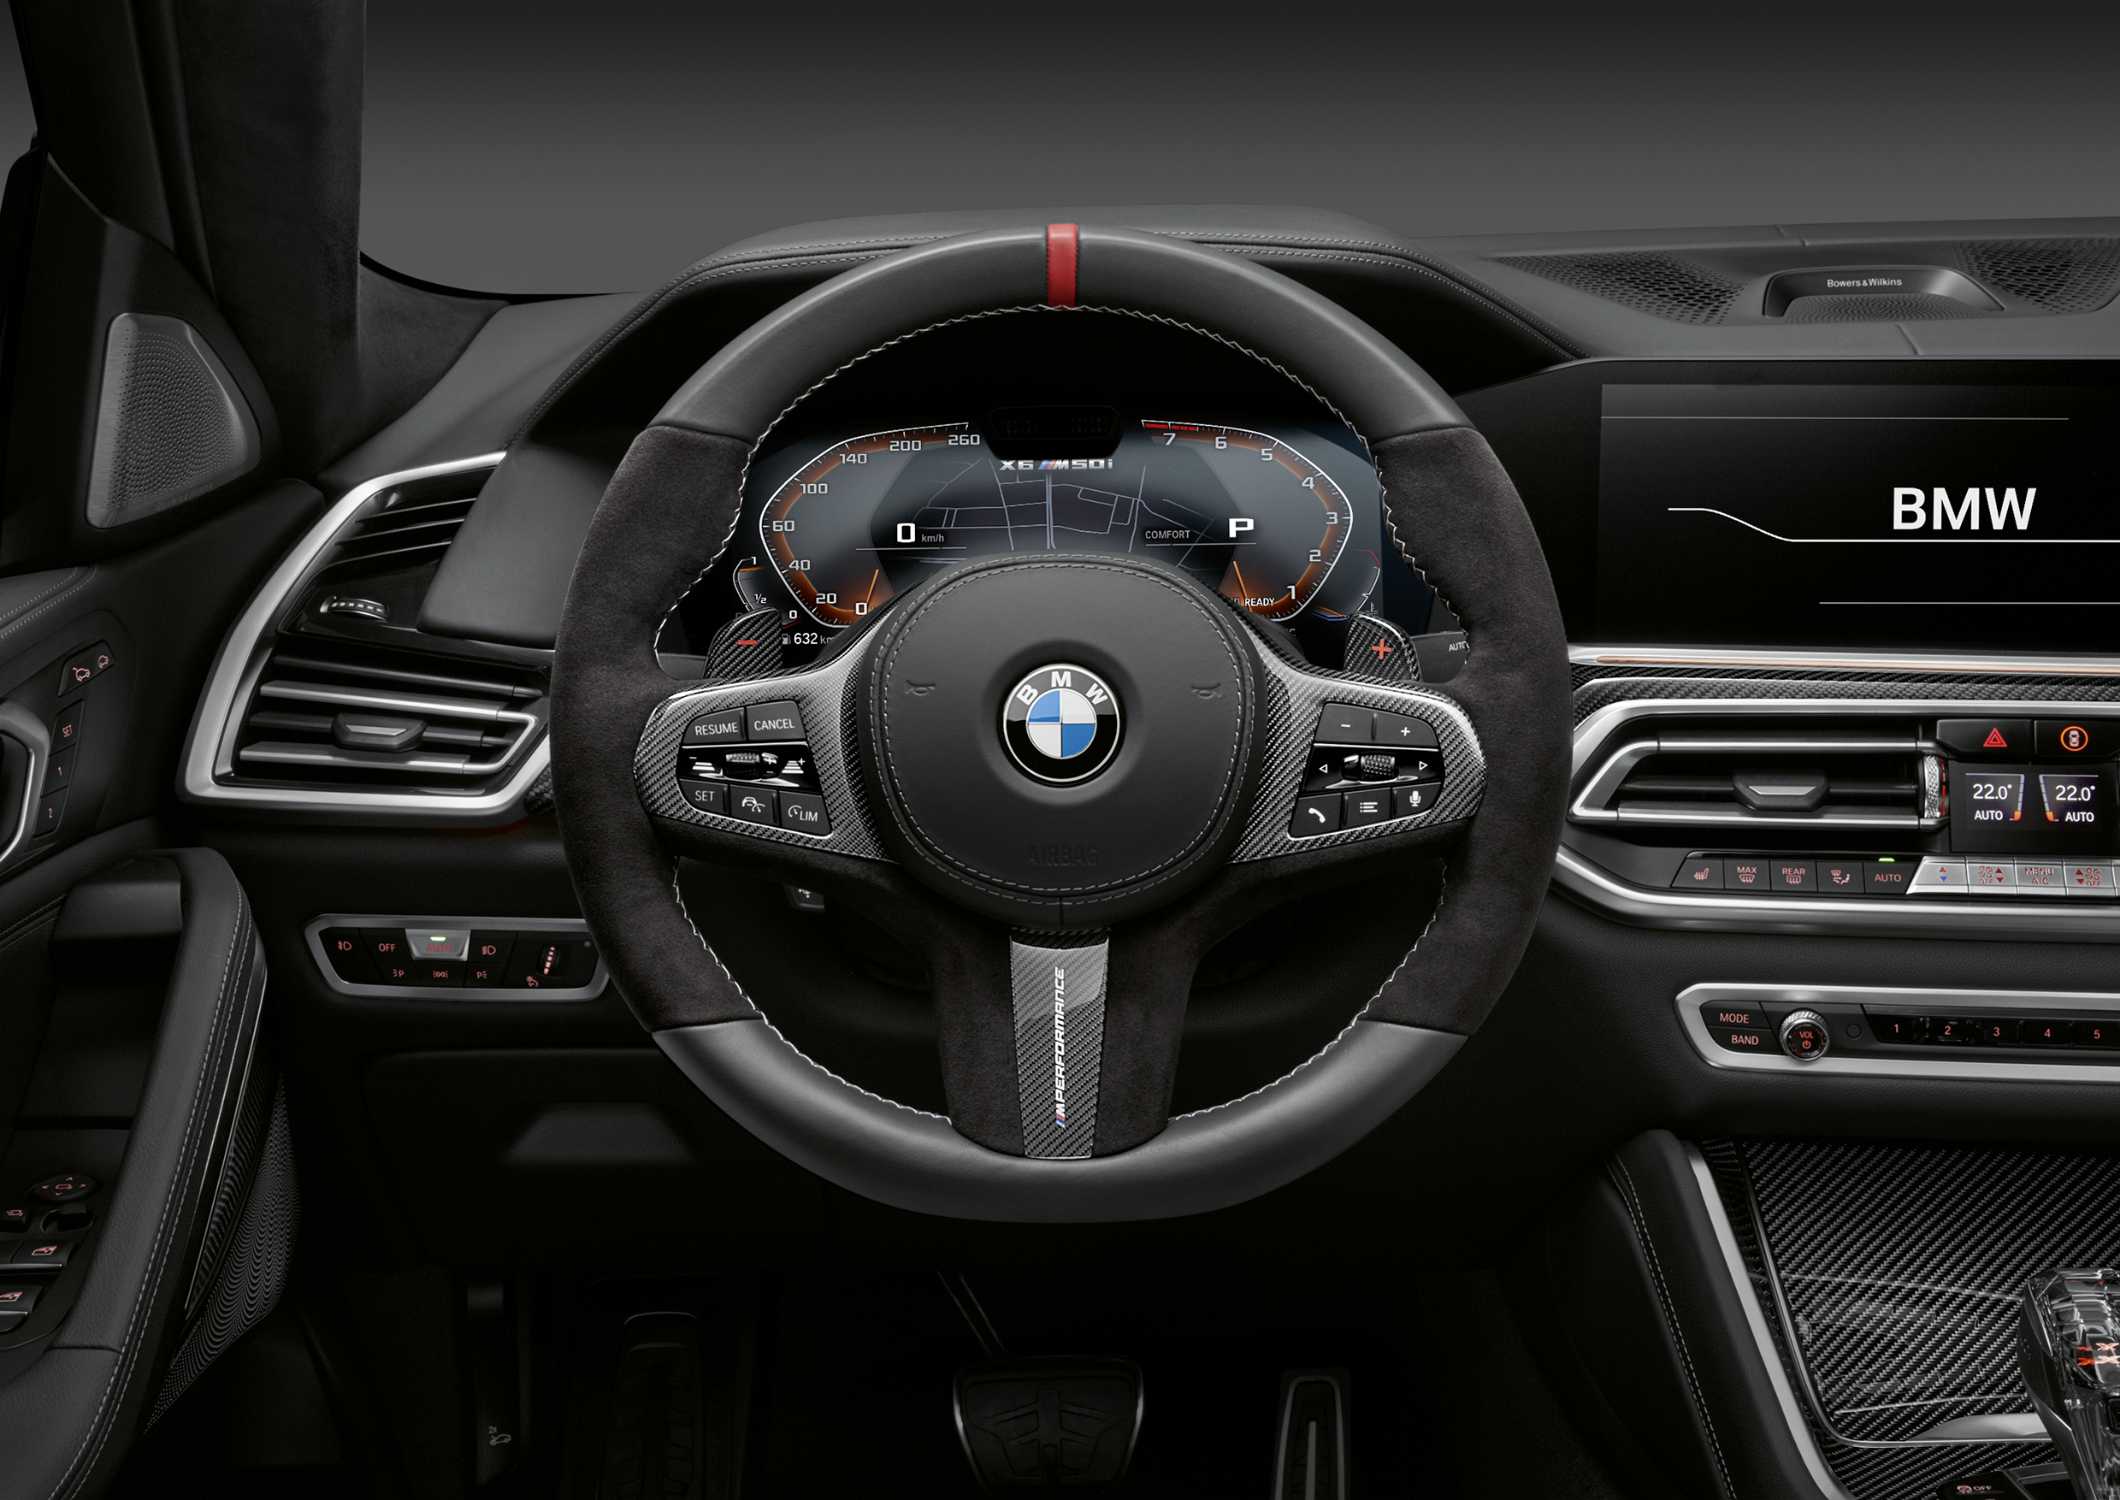 BMW X6, M Performance steering wheel, M Performance shift paddles in carbon fibre, M Performance steering wheel cover in carbon fibre/Alcantara (10/2019)